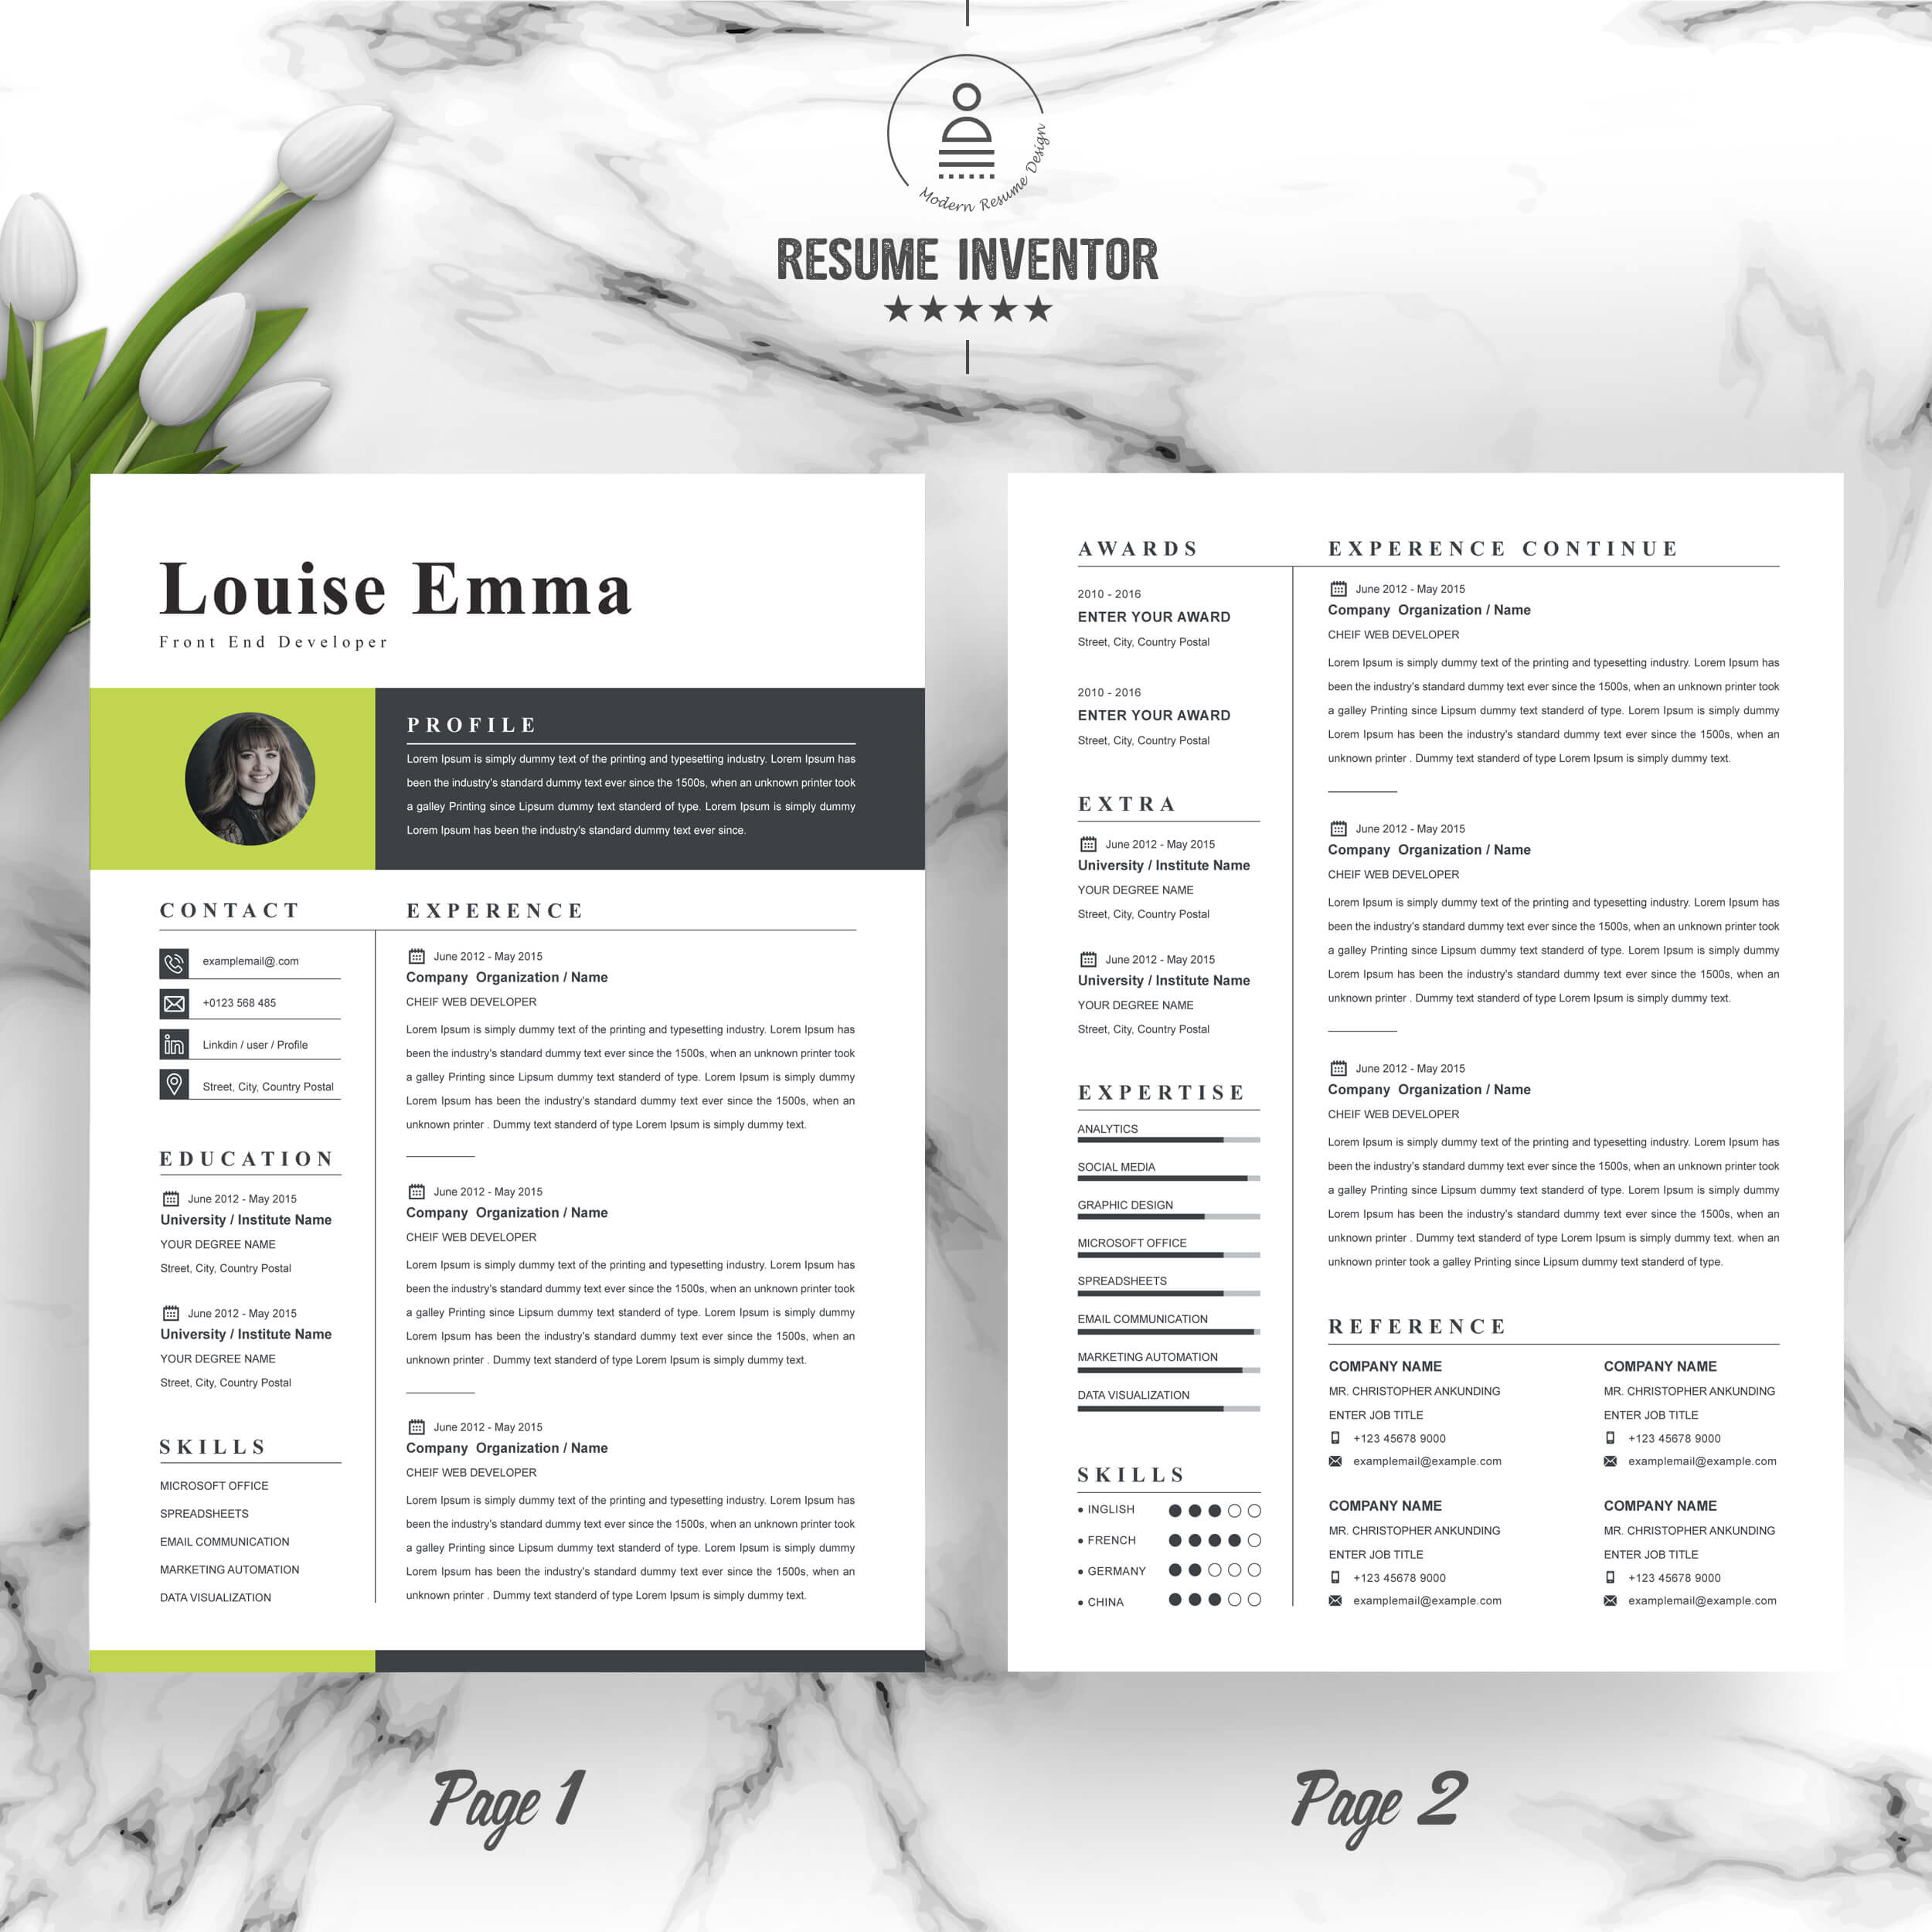 Front End Developer Resume Template | Modern CV Template Word preview image.